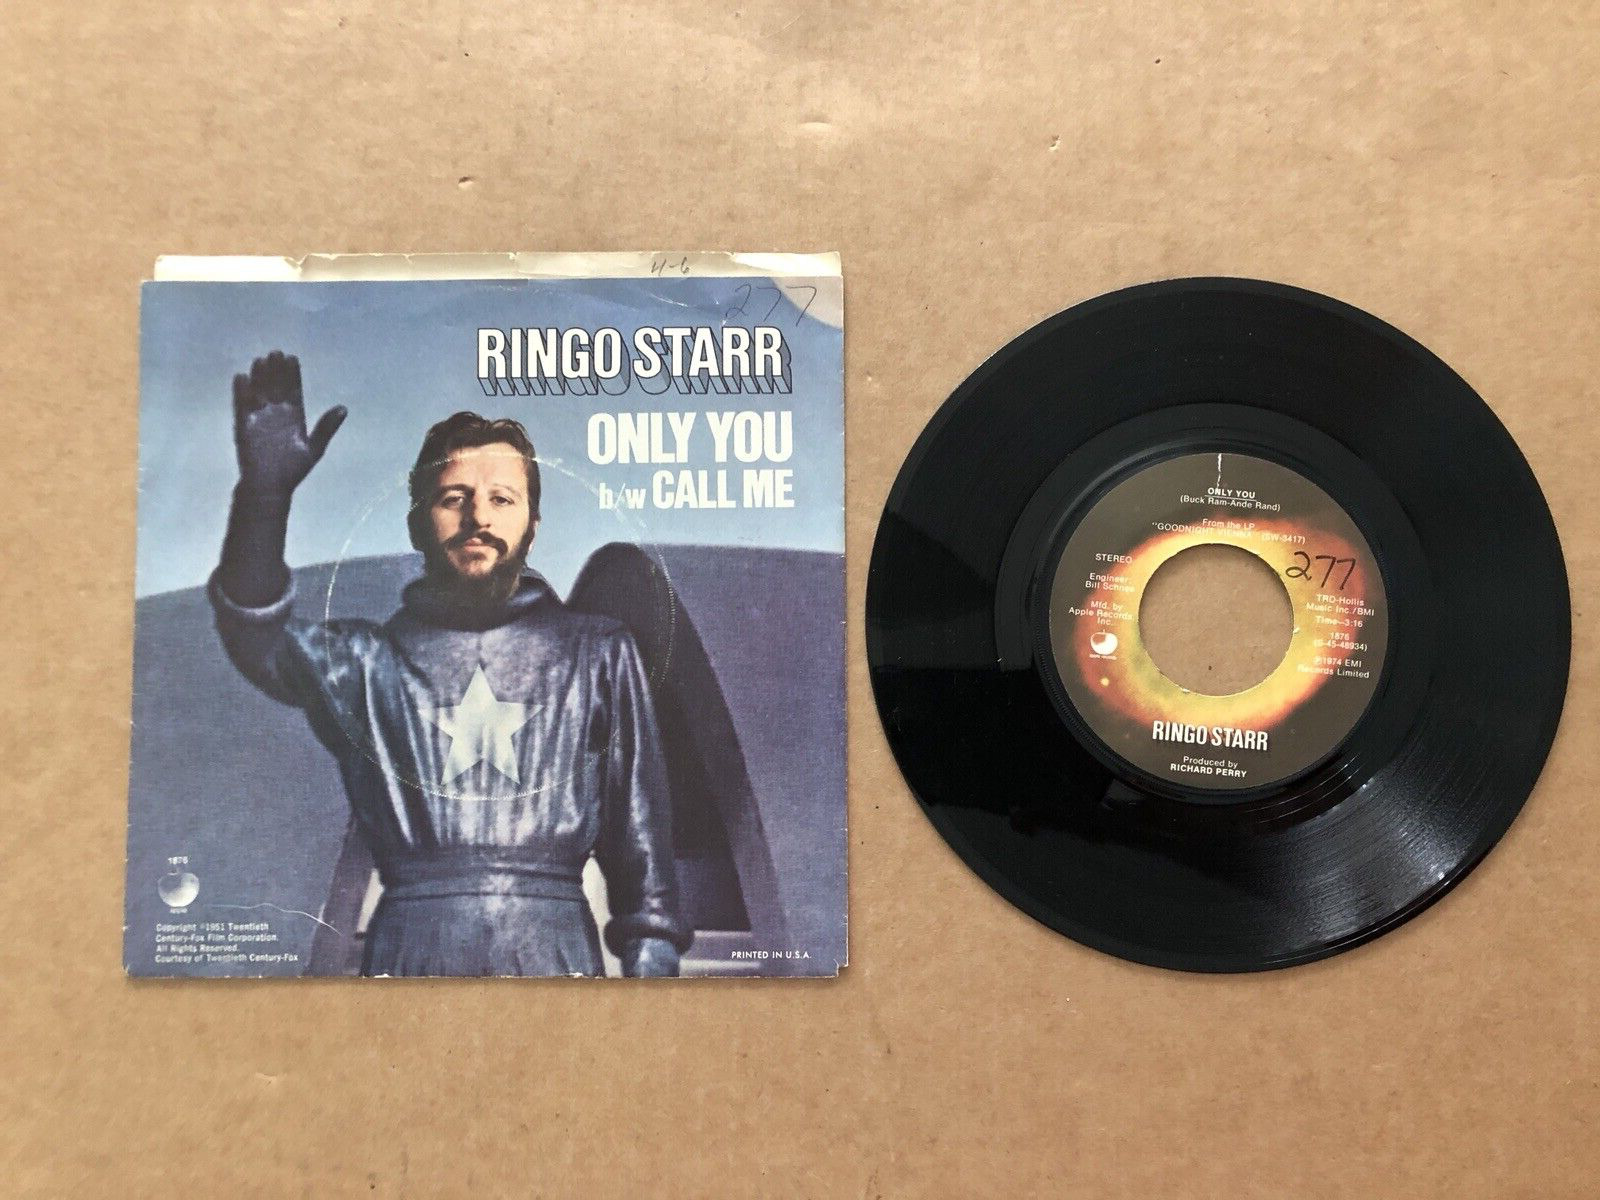 Vintage APPLE Record 45 rpm 1876 RINGO STARR Only You & Call Me w Picture Sleeve